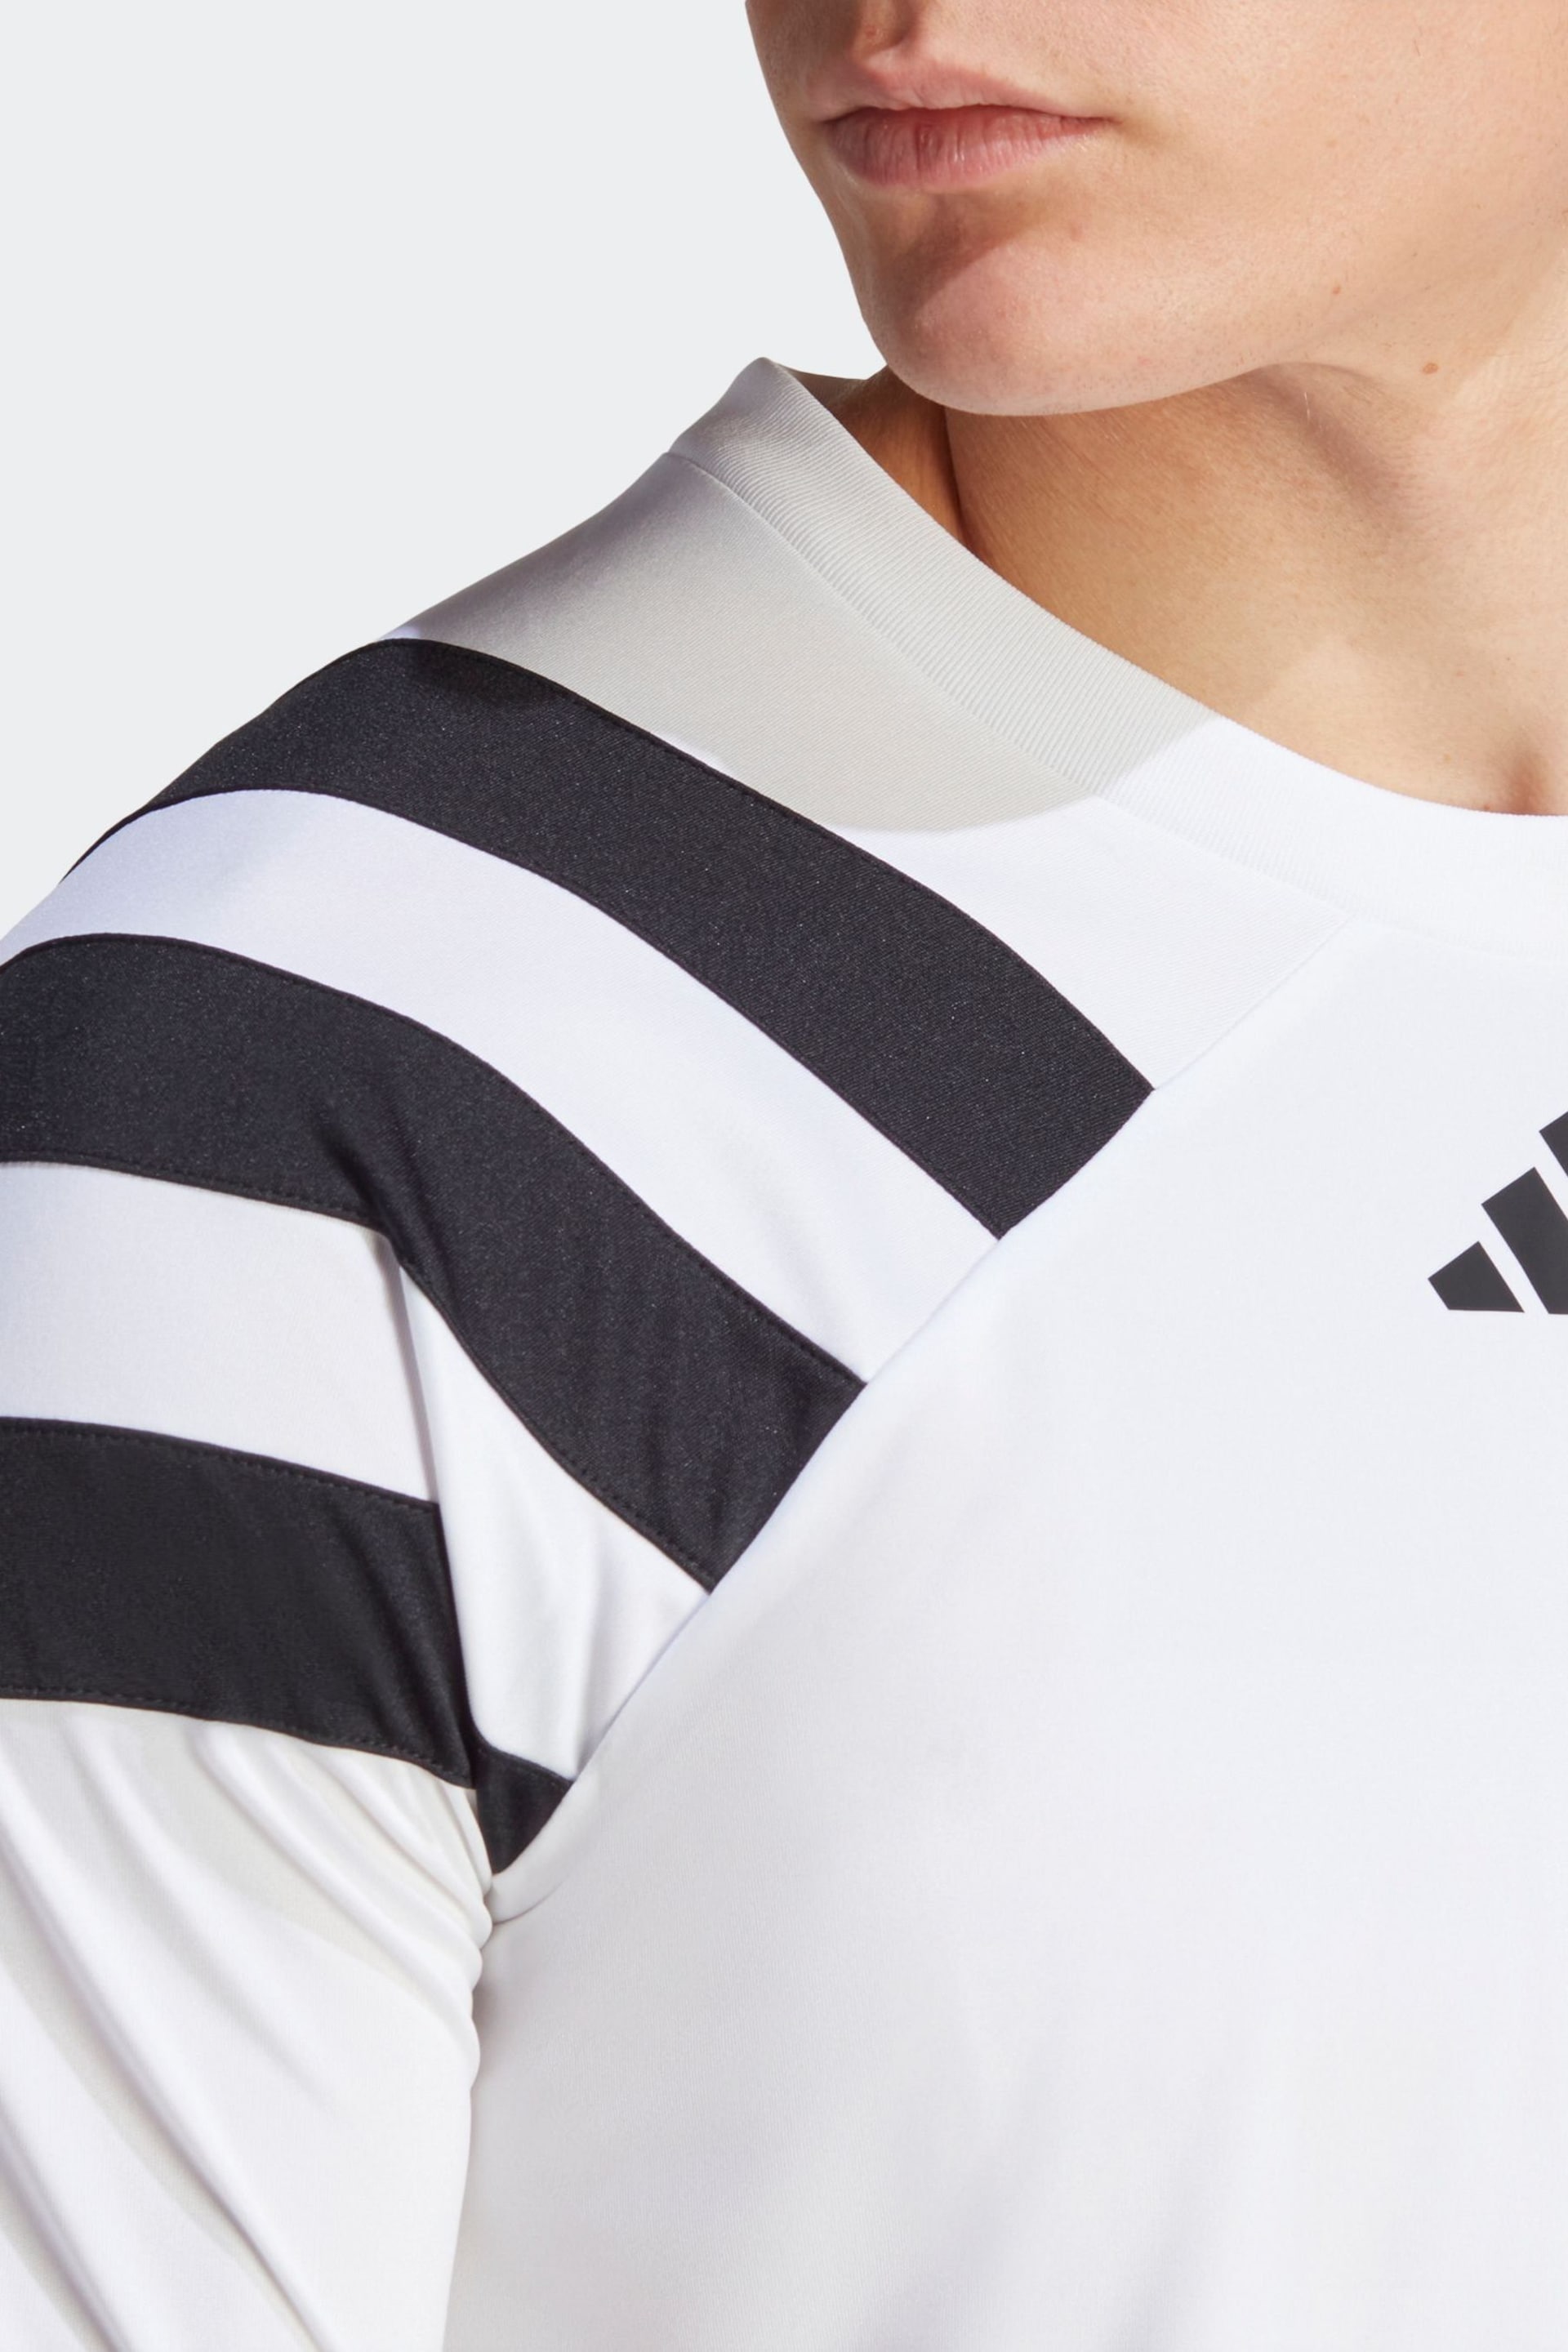 adidas White Fortore 23 Jersey - Image 5 of 8